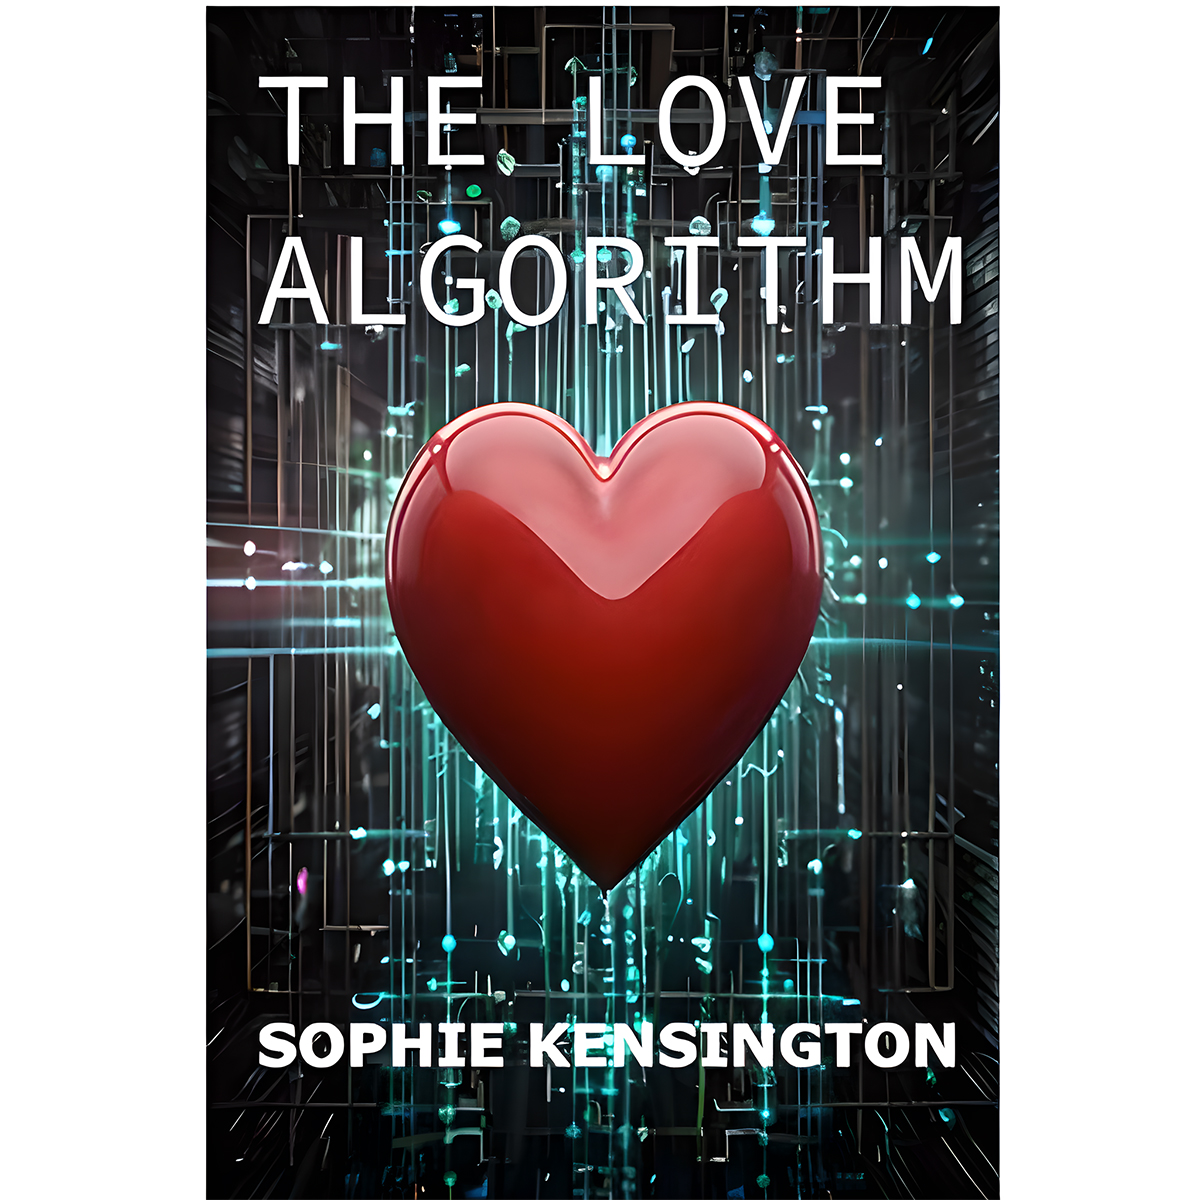 It's time for the Sunday #writerslift! Drop your #blog #books #vella #art #music links below so I can repost them! And to each of you, I hope you have an amazing Memorial Day weekend! This is my book 'The Love Algorithm': a.co/d/emvFTNt…